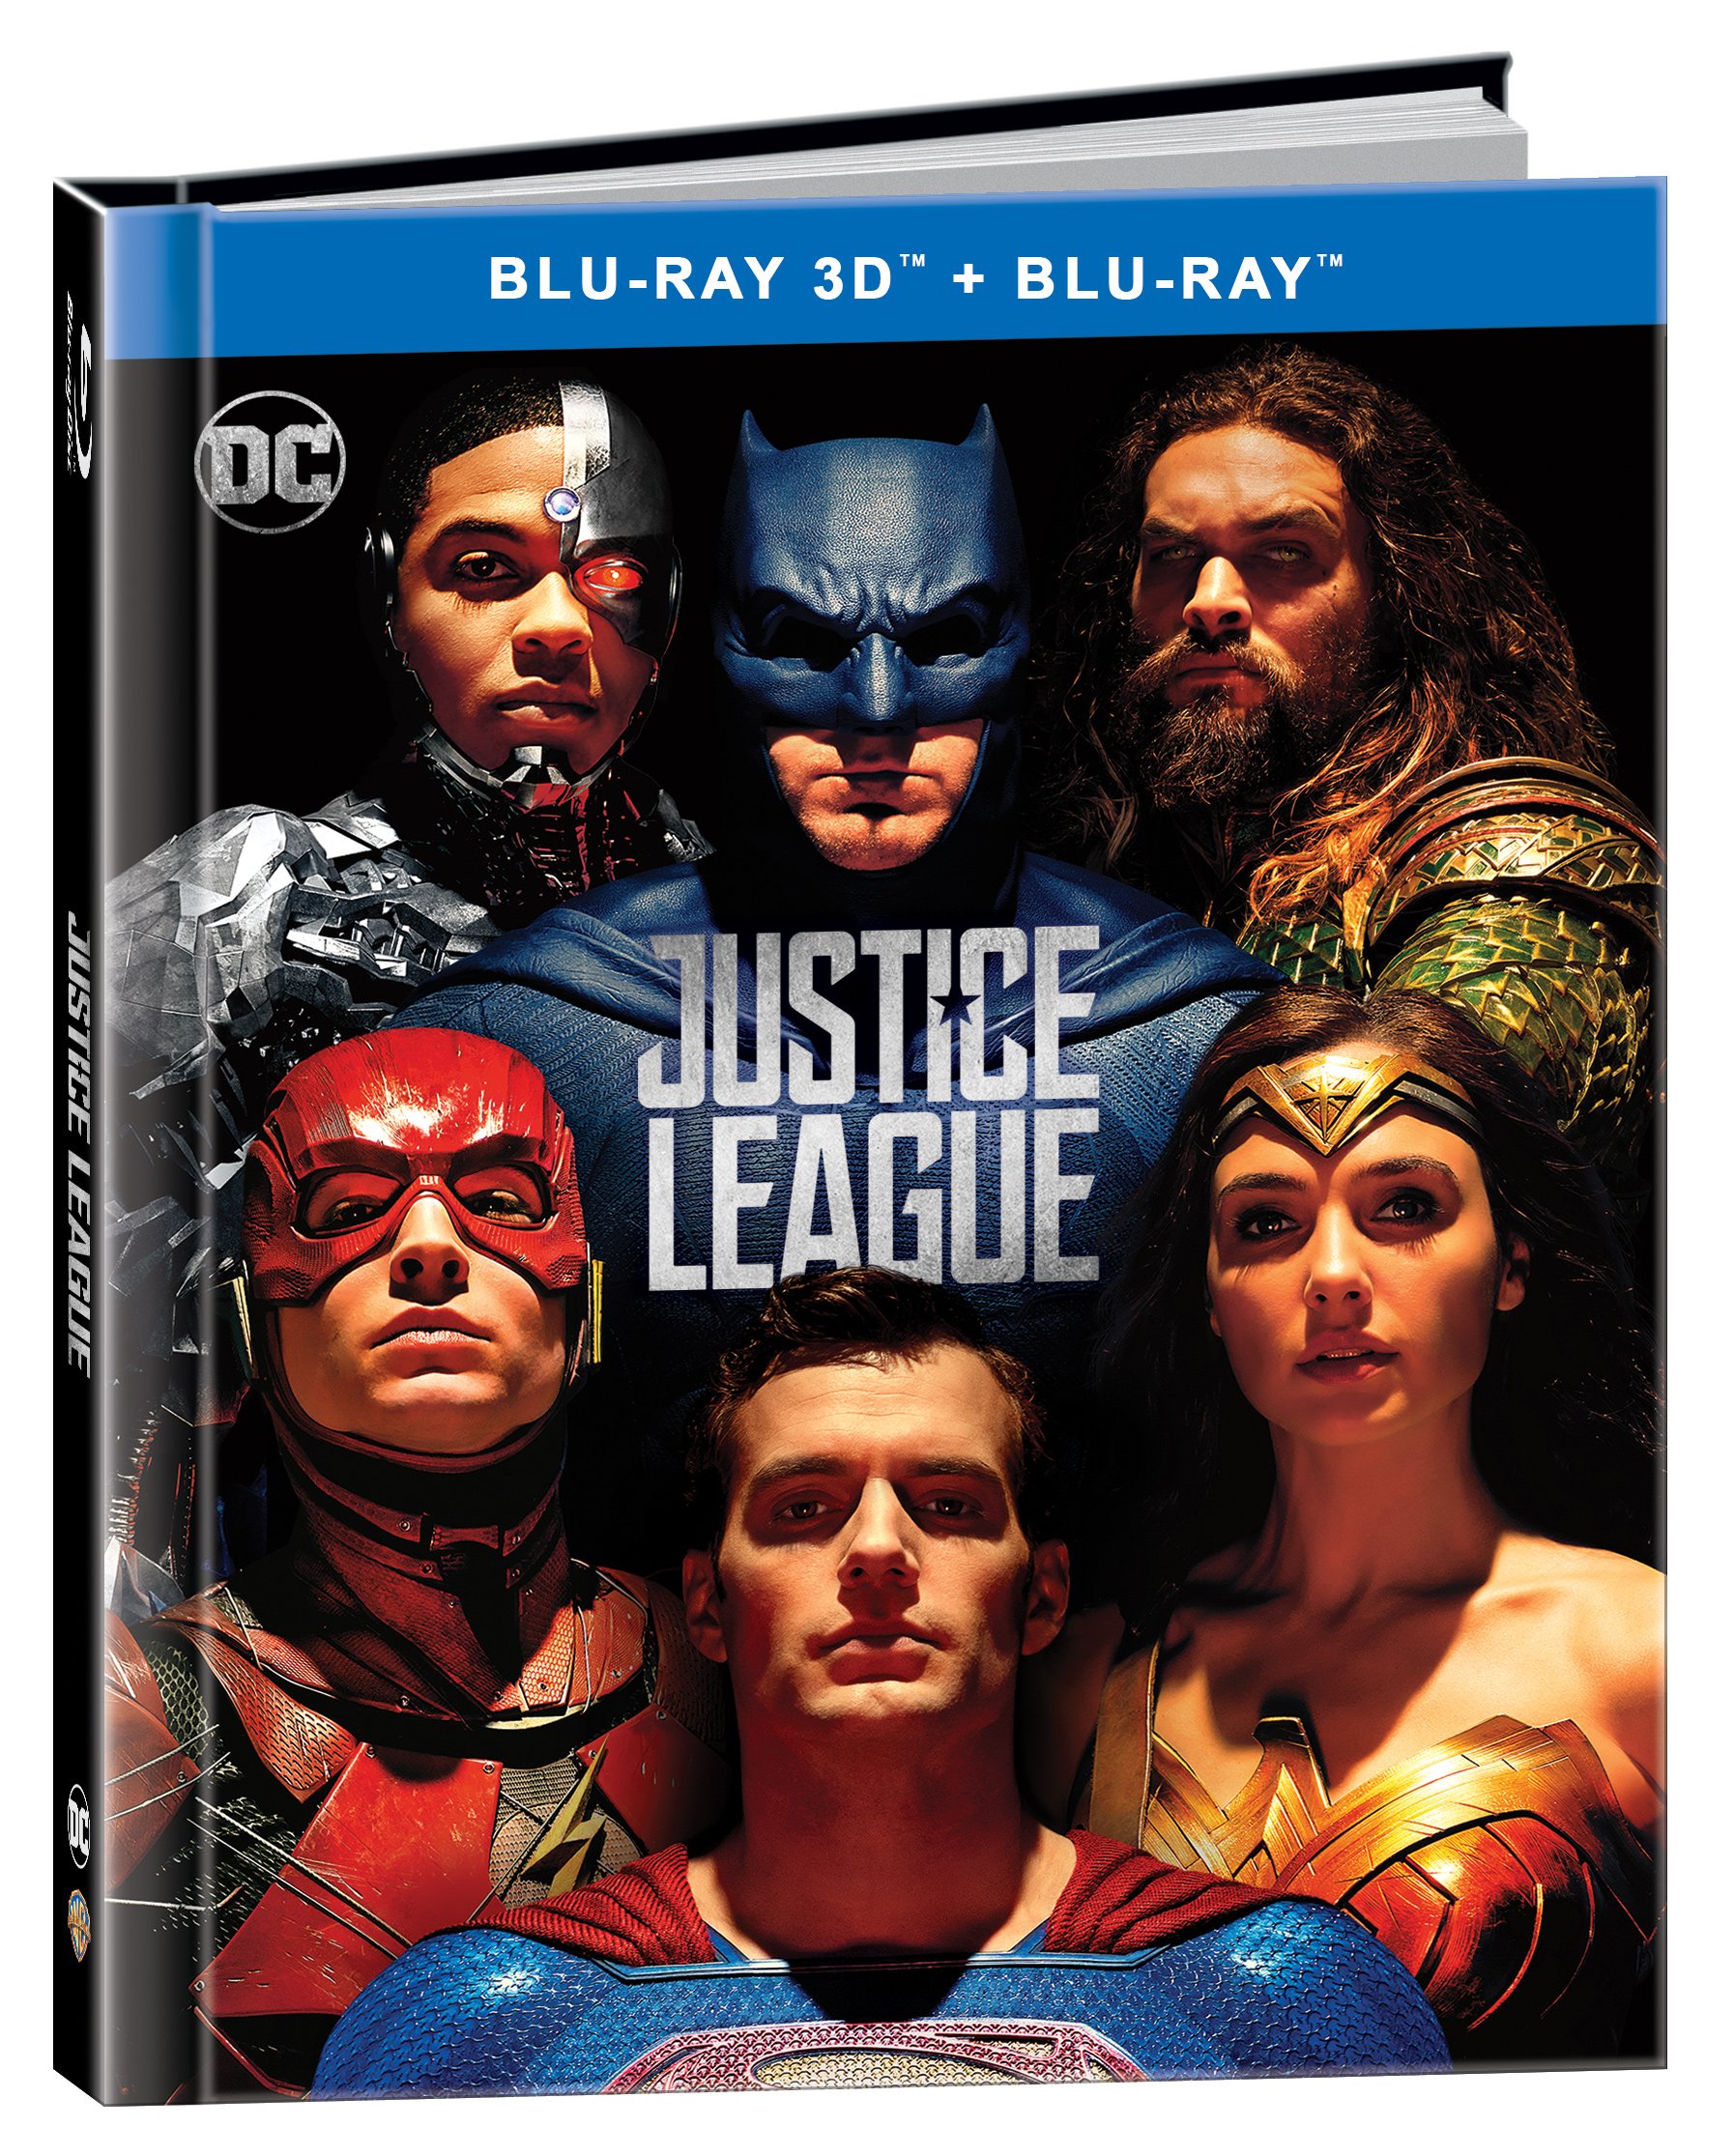 justice-league-blu-ray-3d-blu-ray-64-pages-digibook-with-lenticular-packaging